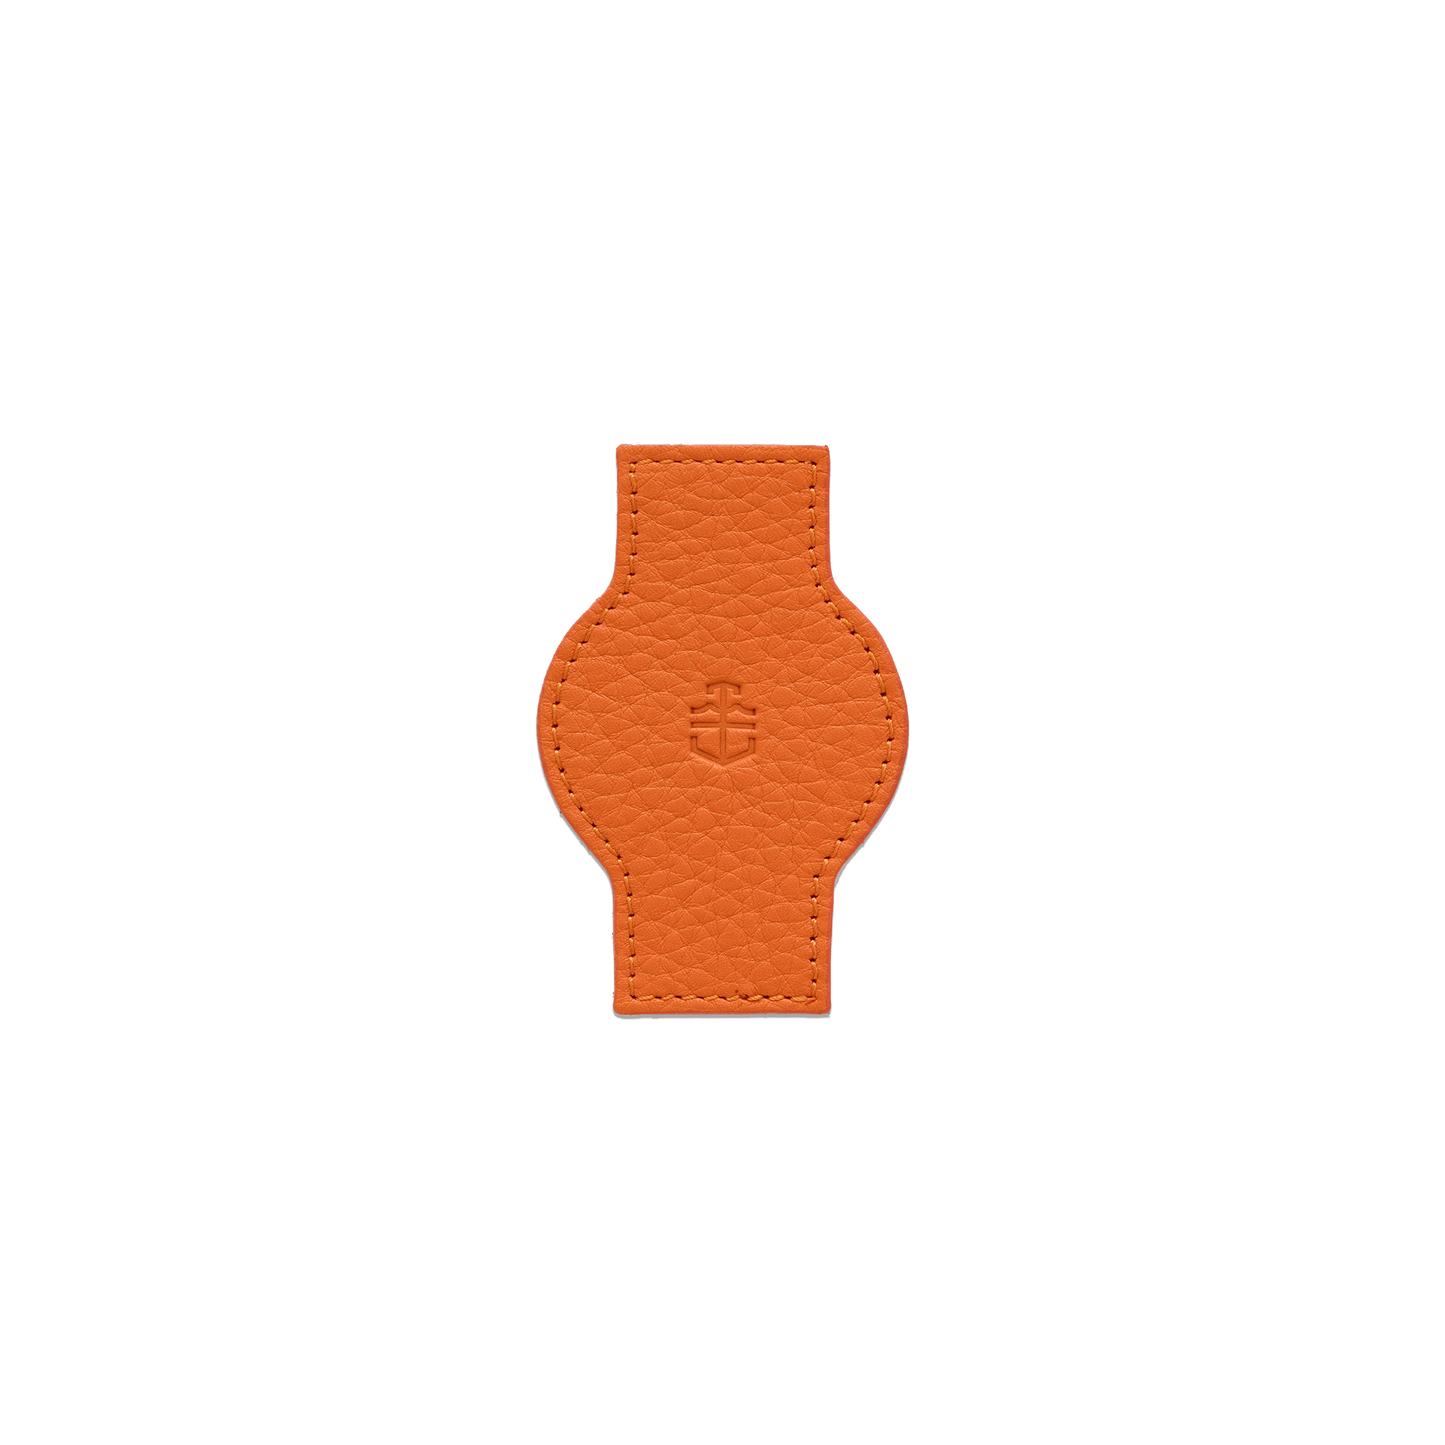 Time+Tide Watches - Orange Elegant Leather Watch Pouch